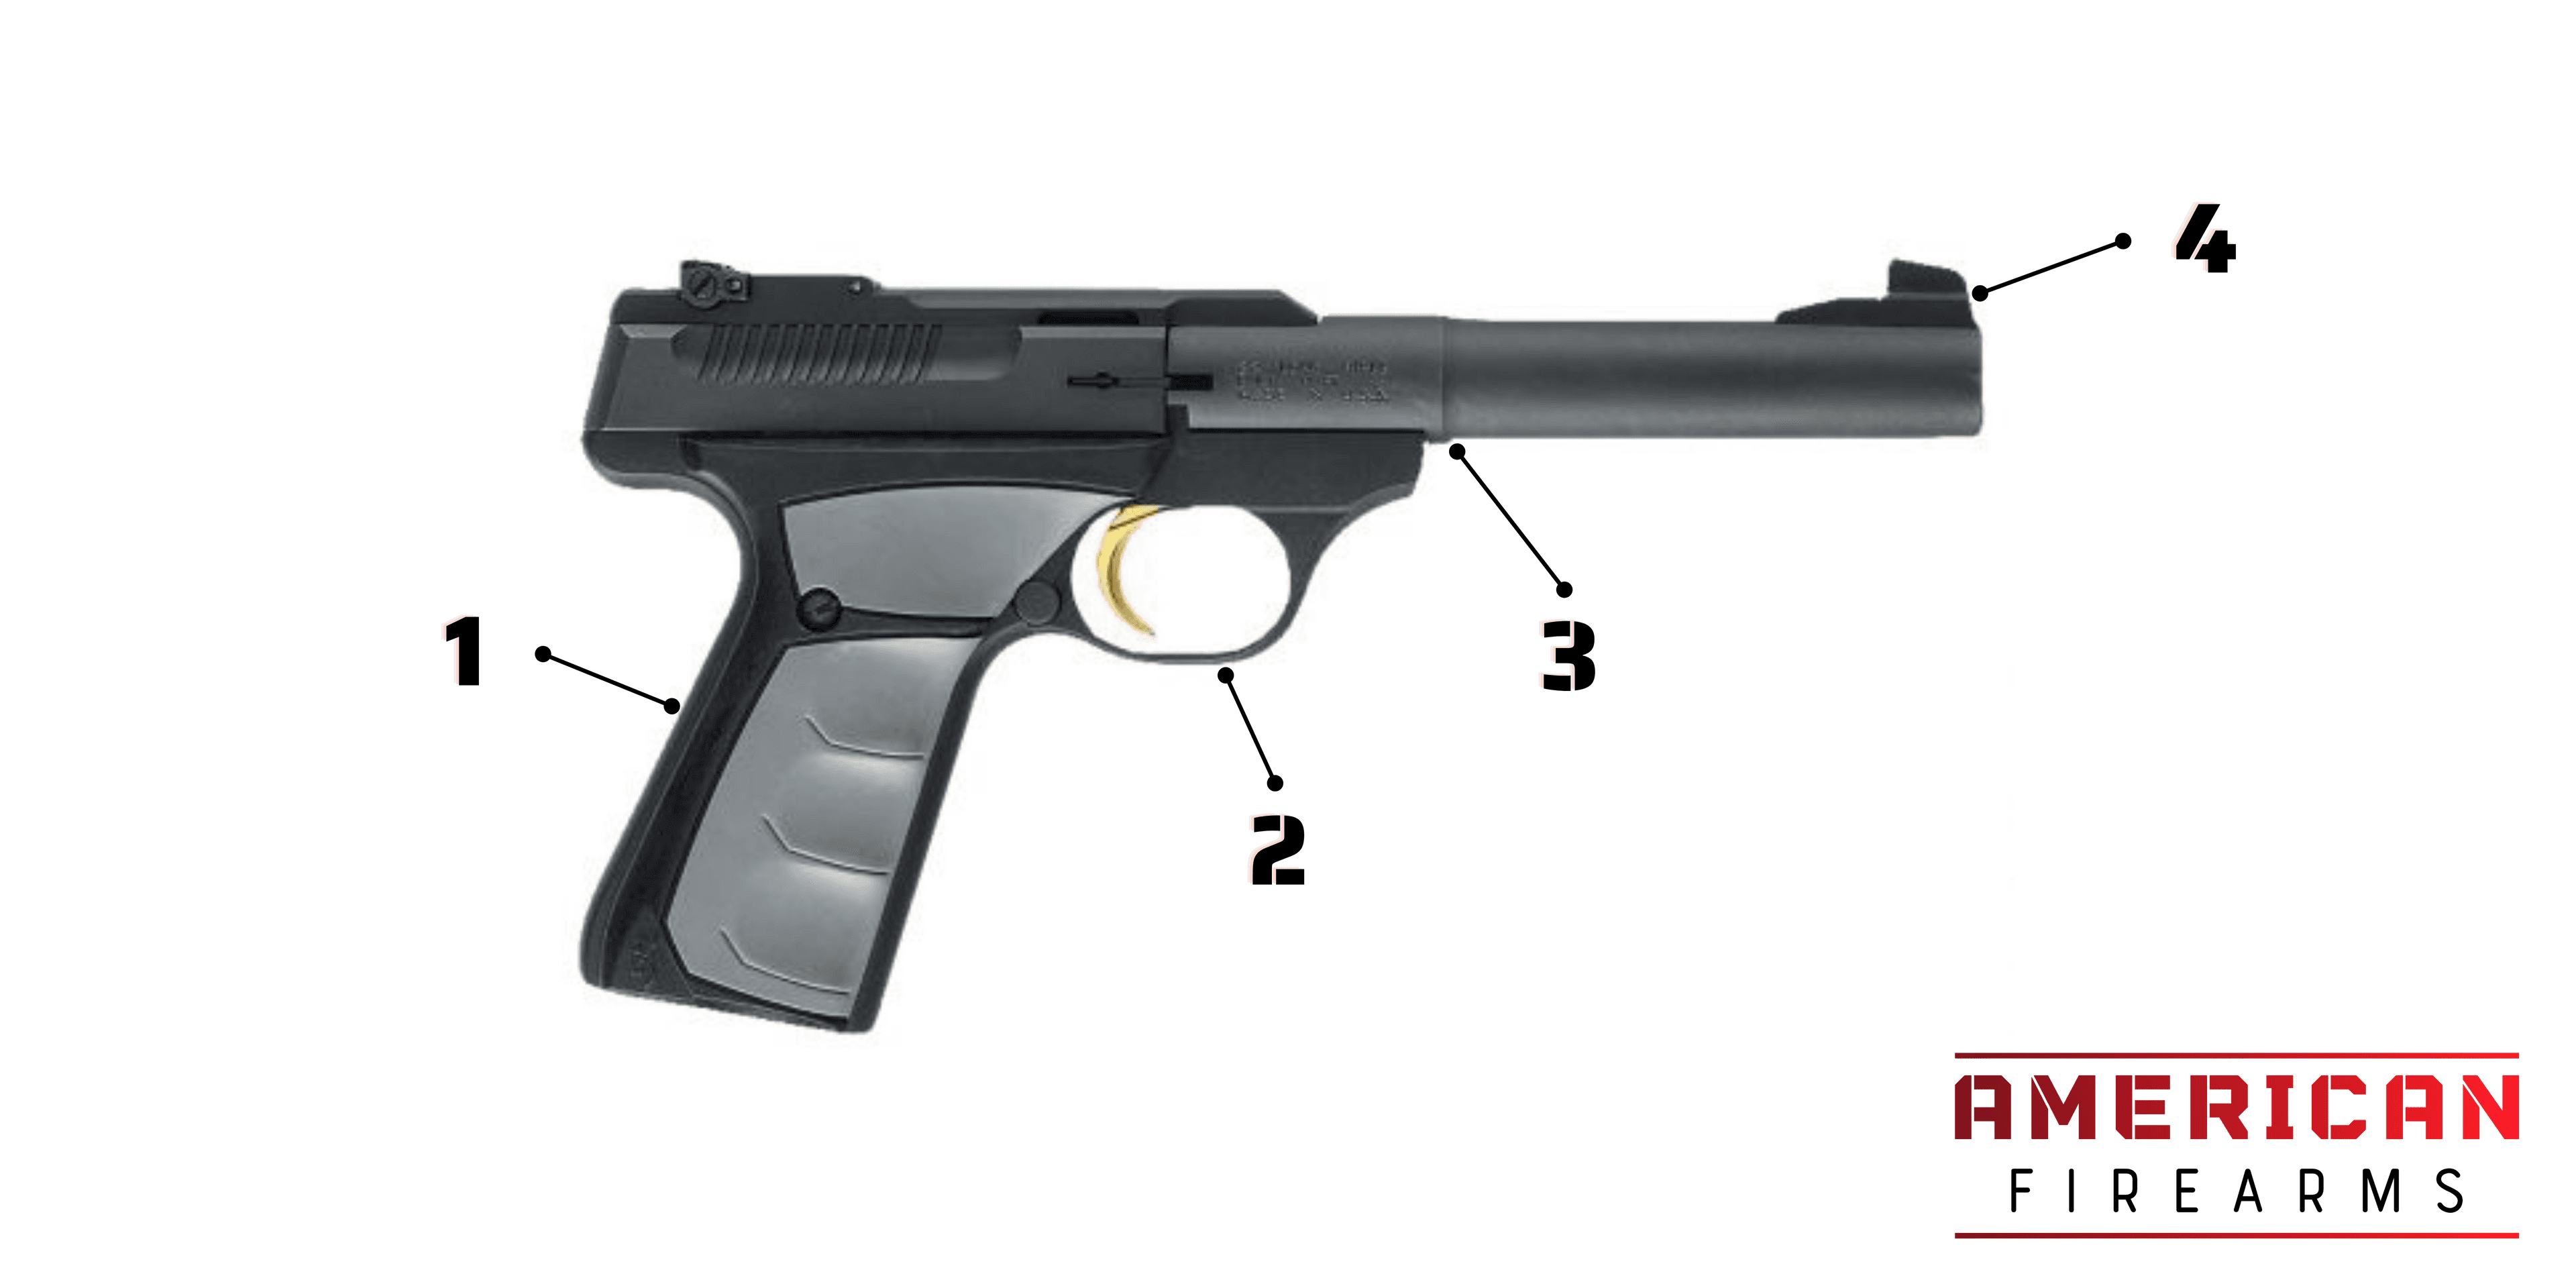 Some of the key Buck Mark features